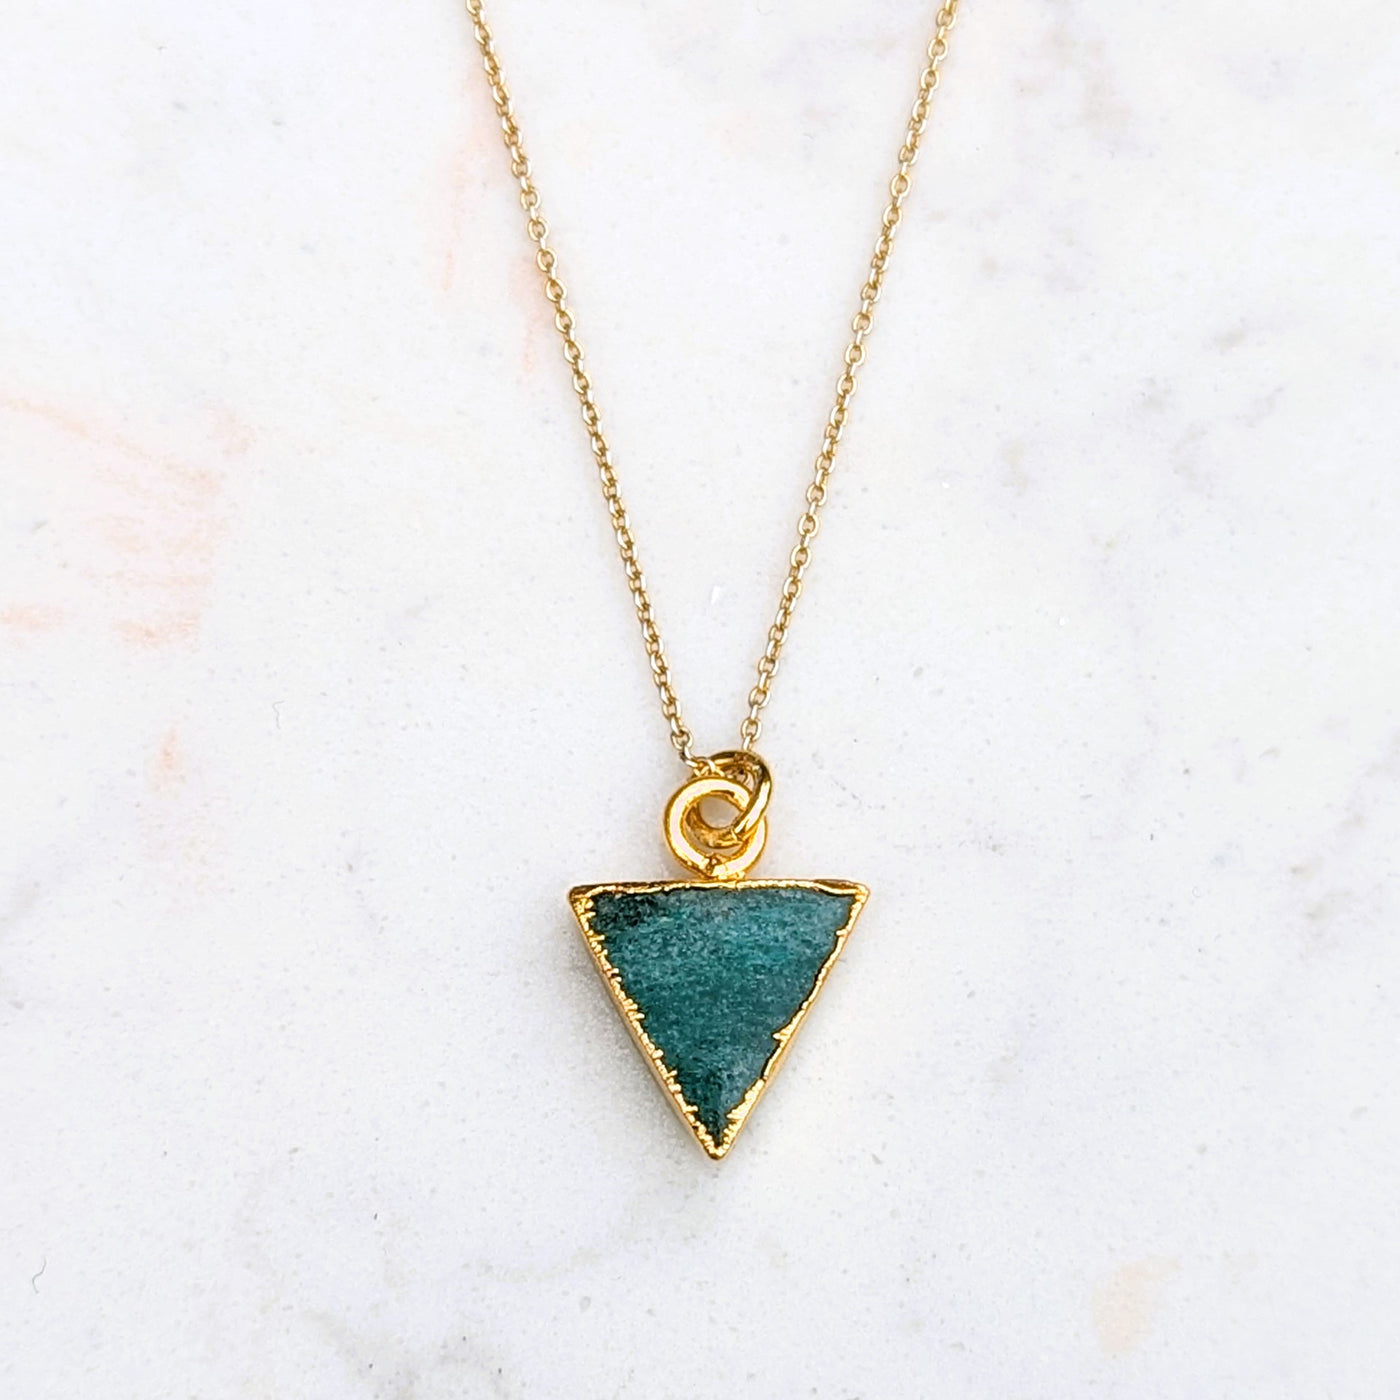 gold plated sterling silver green aventurine triangular charm pendant necklace